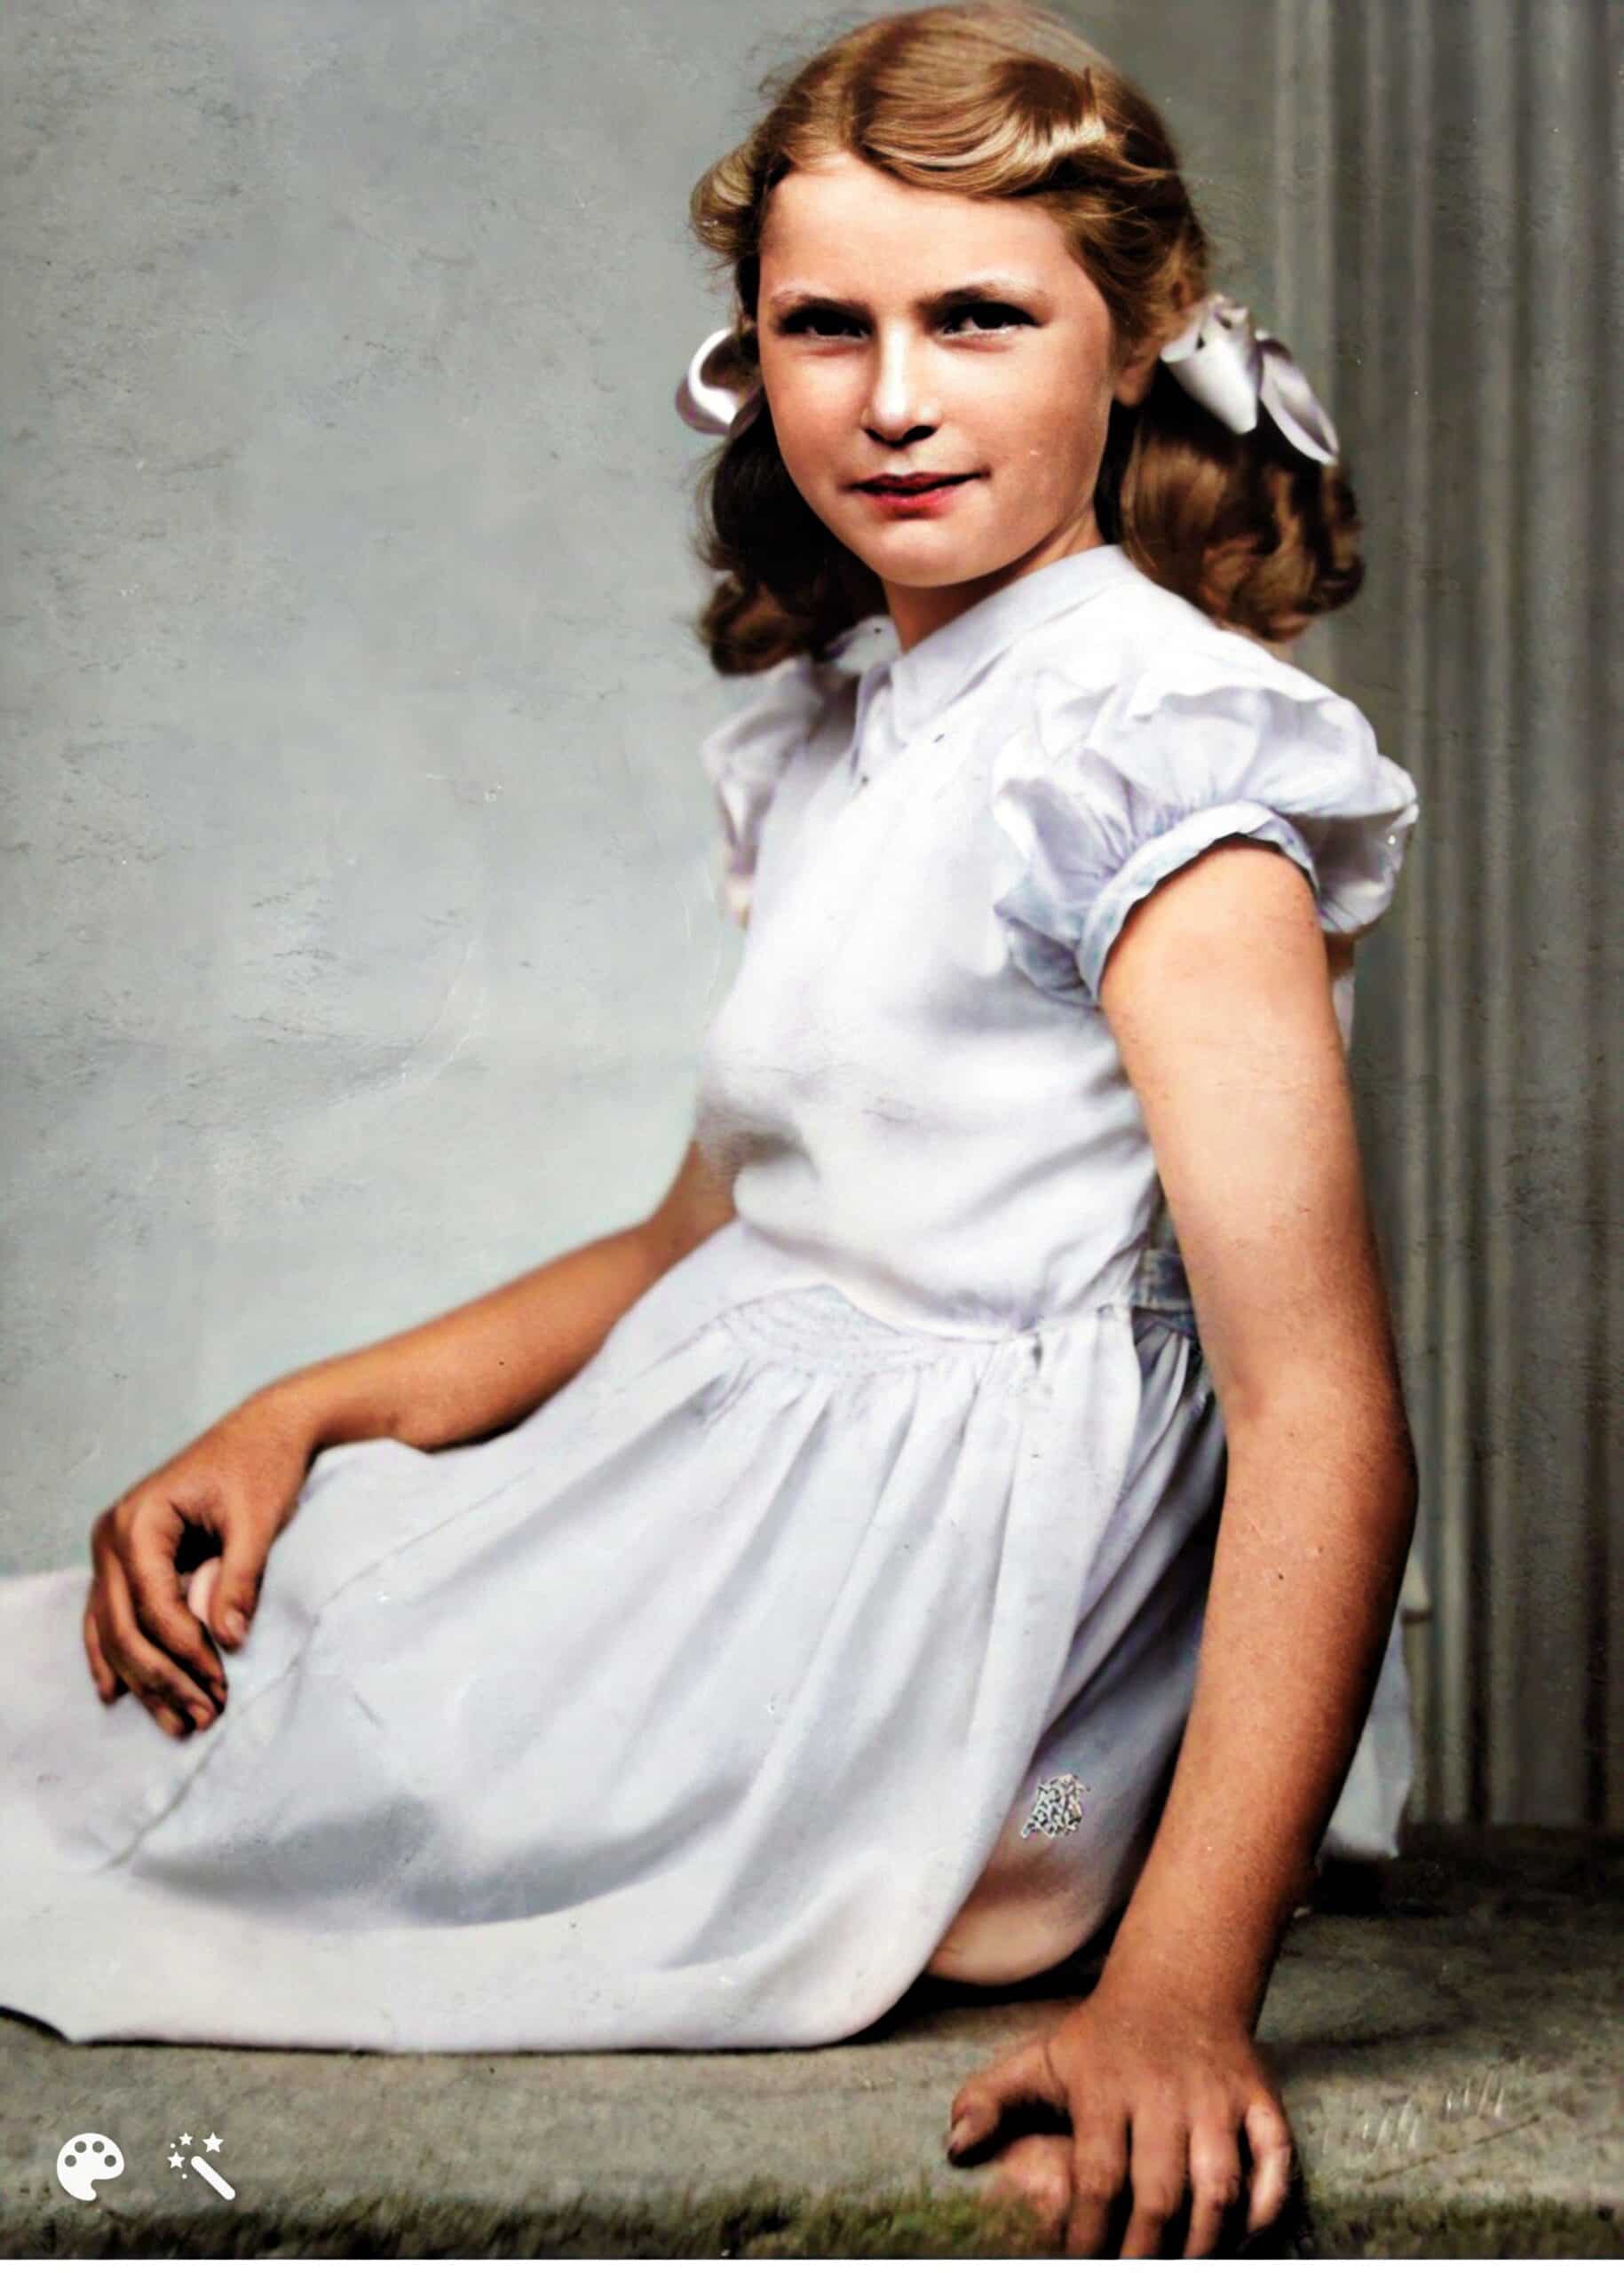 Peter's mother, Aileen, as a young teenager. Photo repaired, enhanced, and colorized by MyHeritage